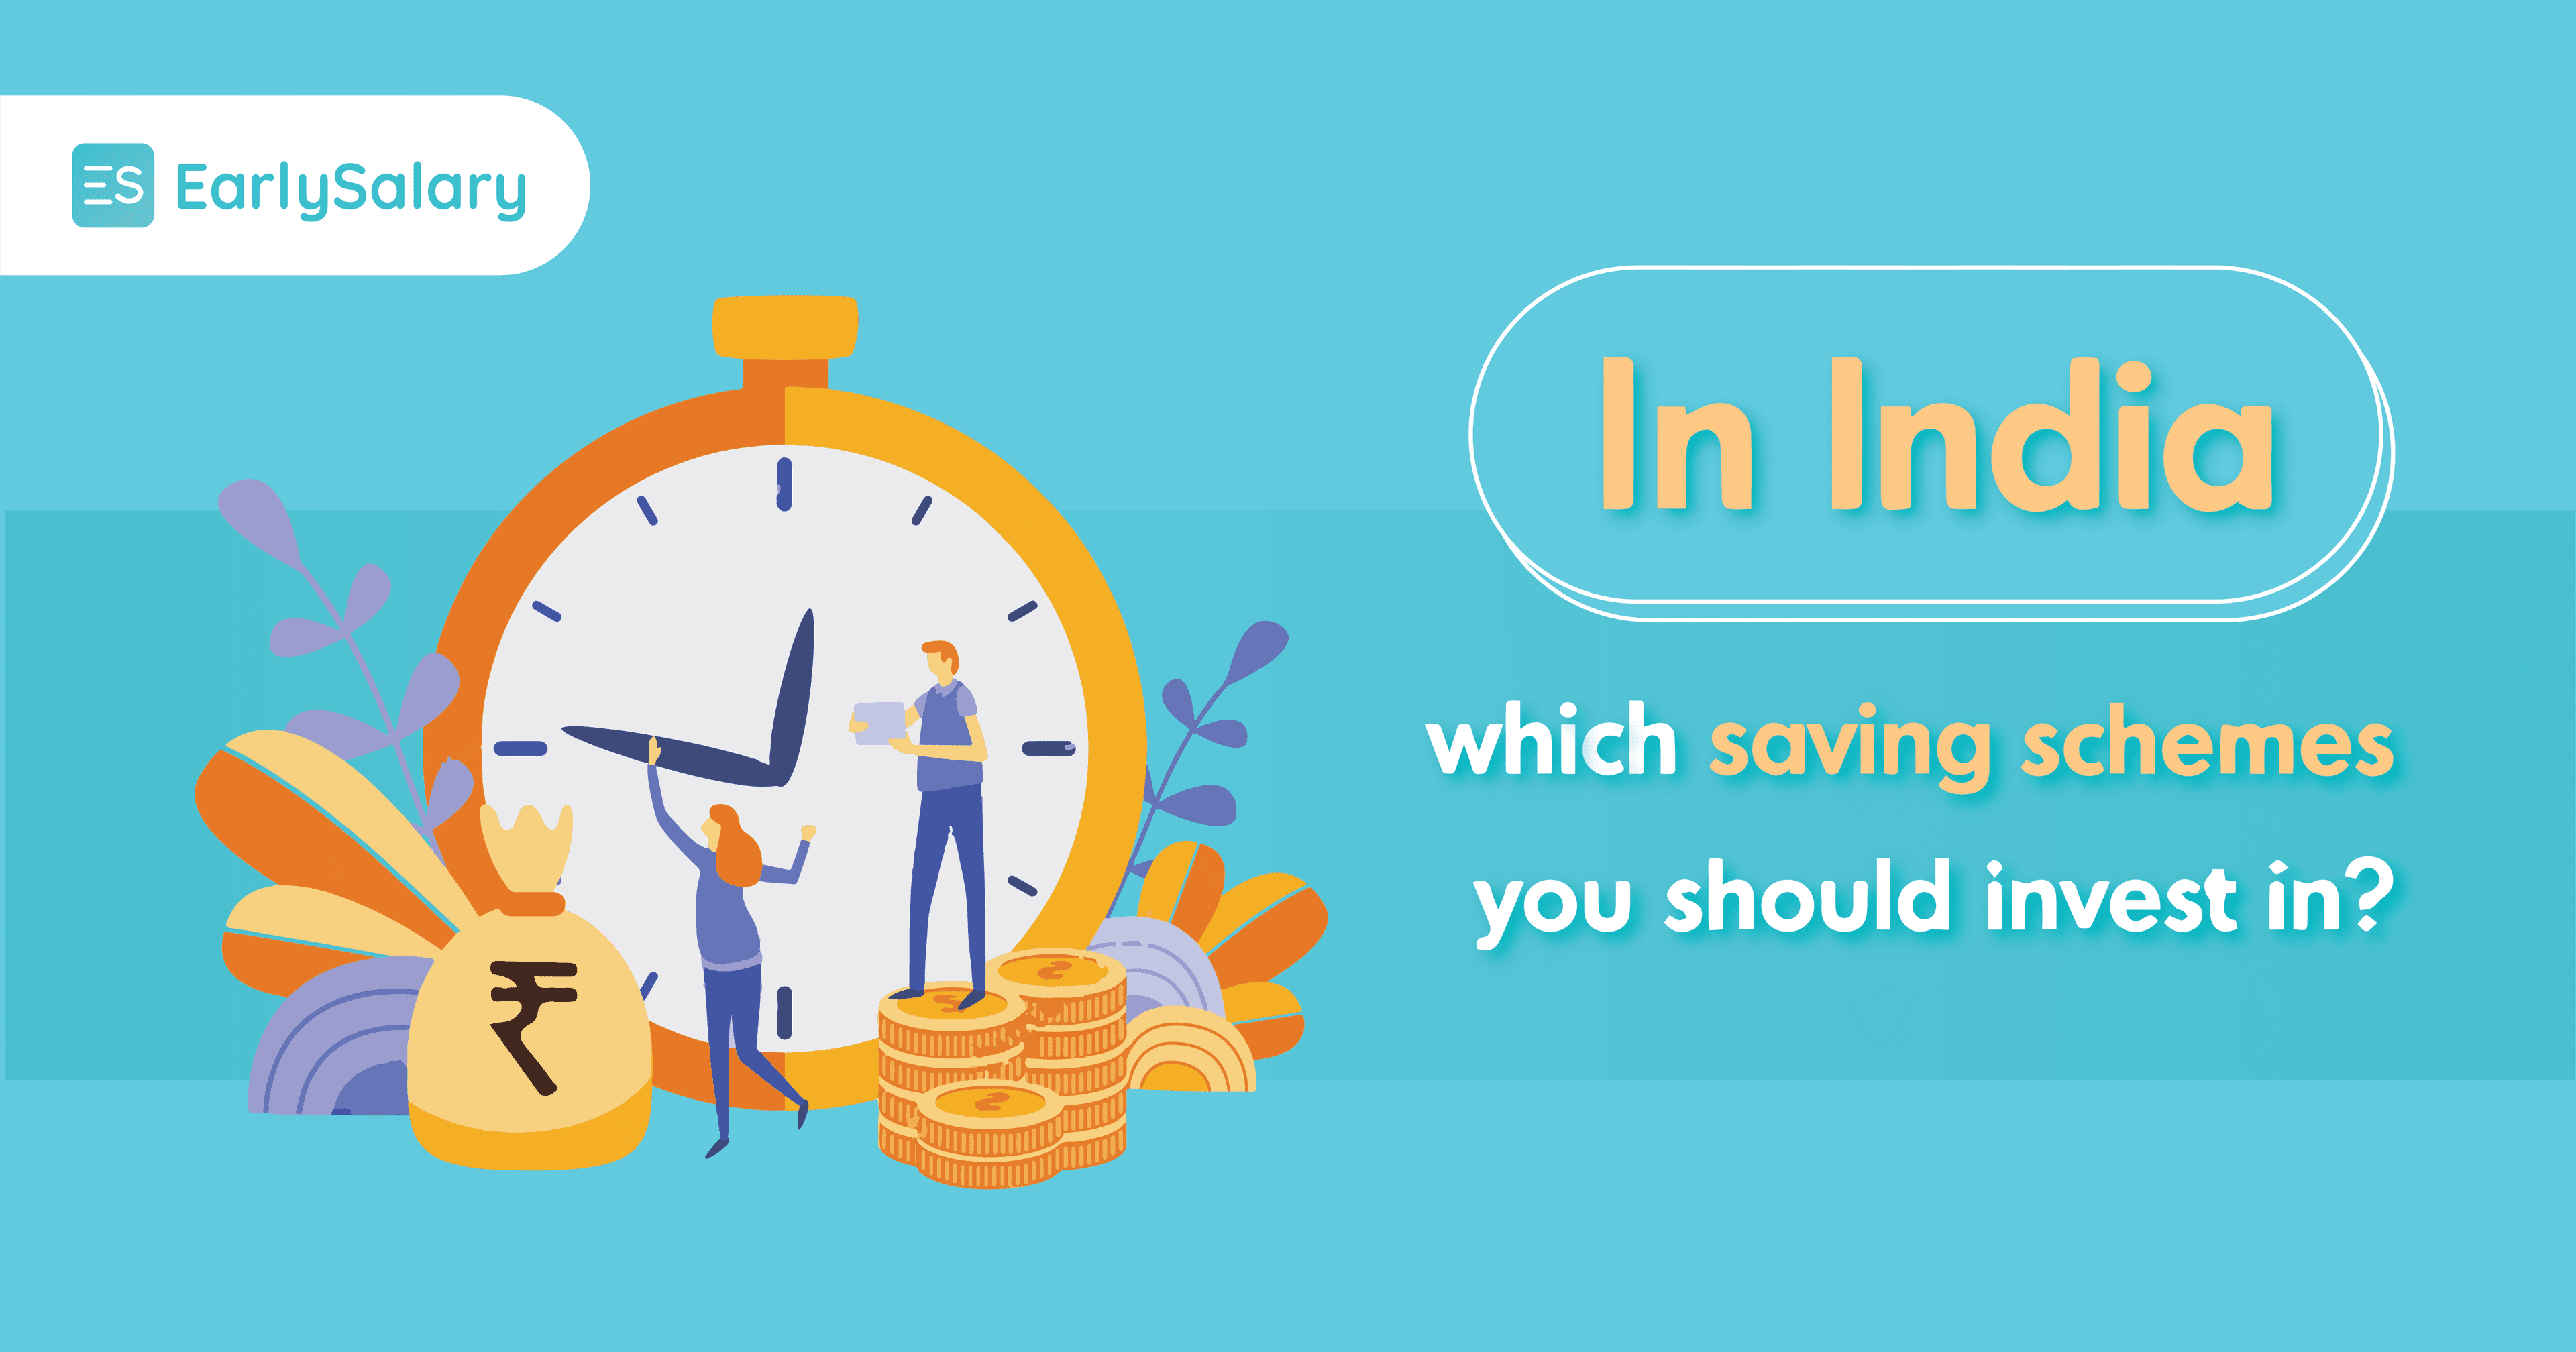 In India, Which Saving Schemes You Should Invest in?